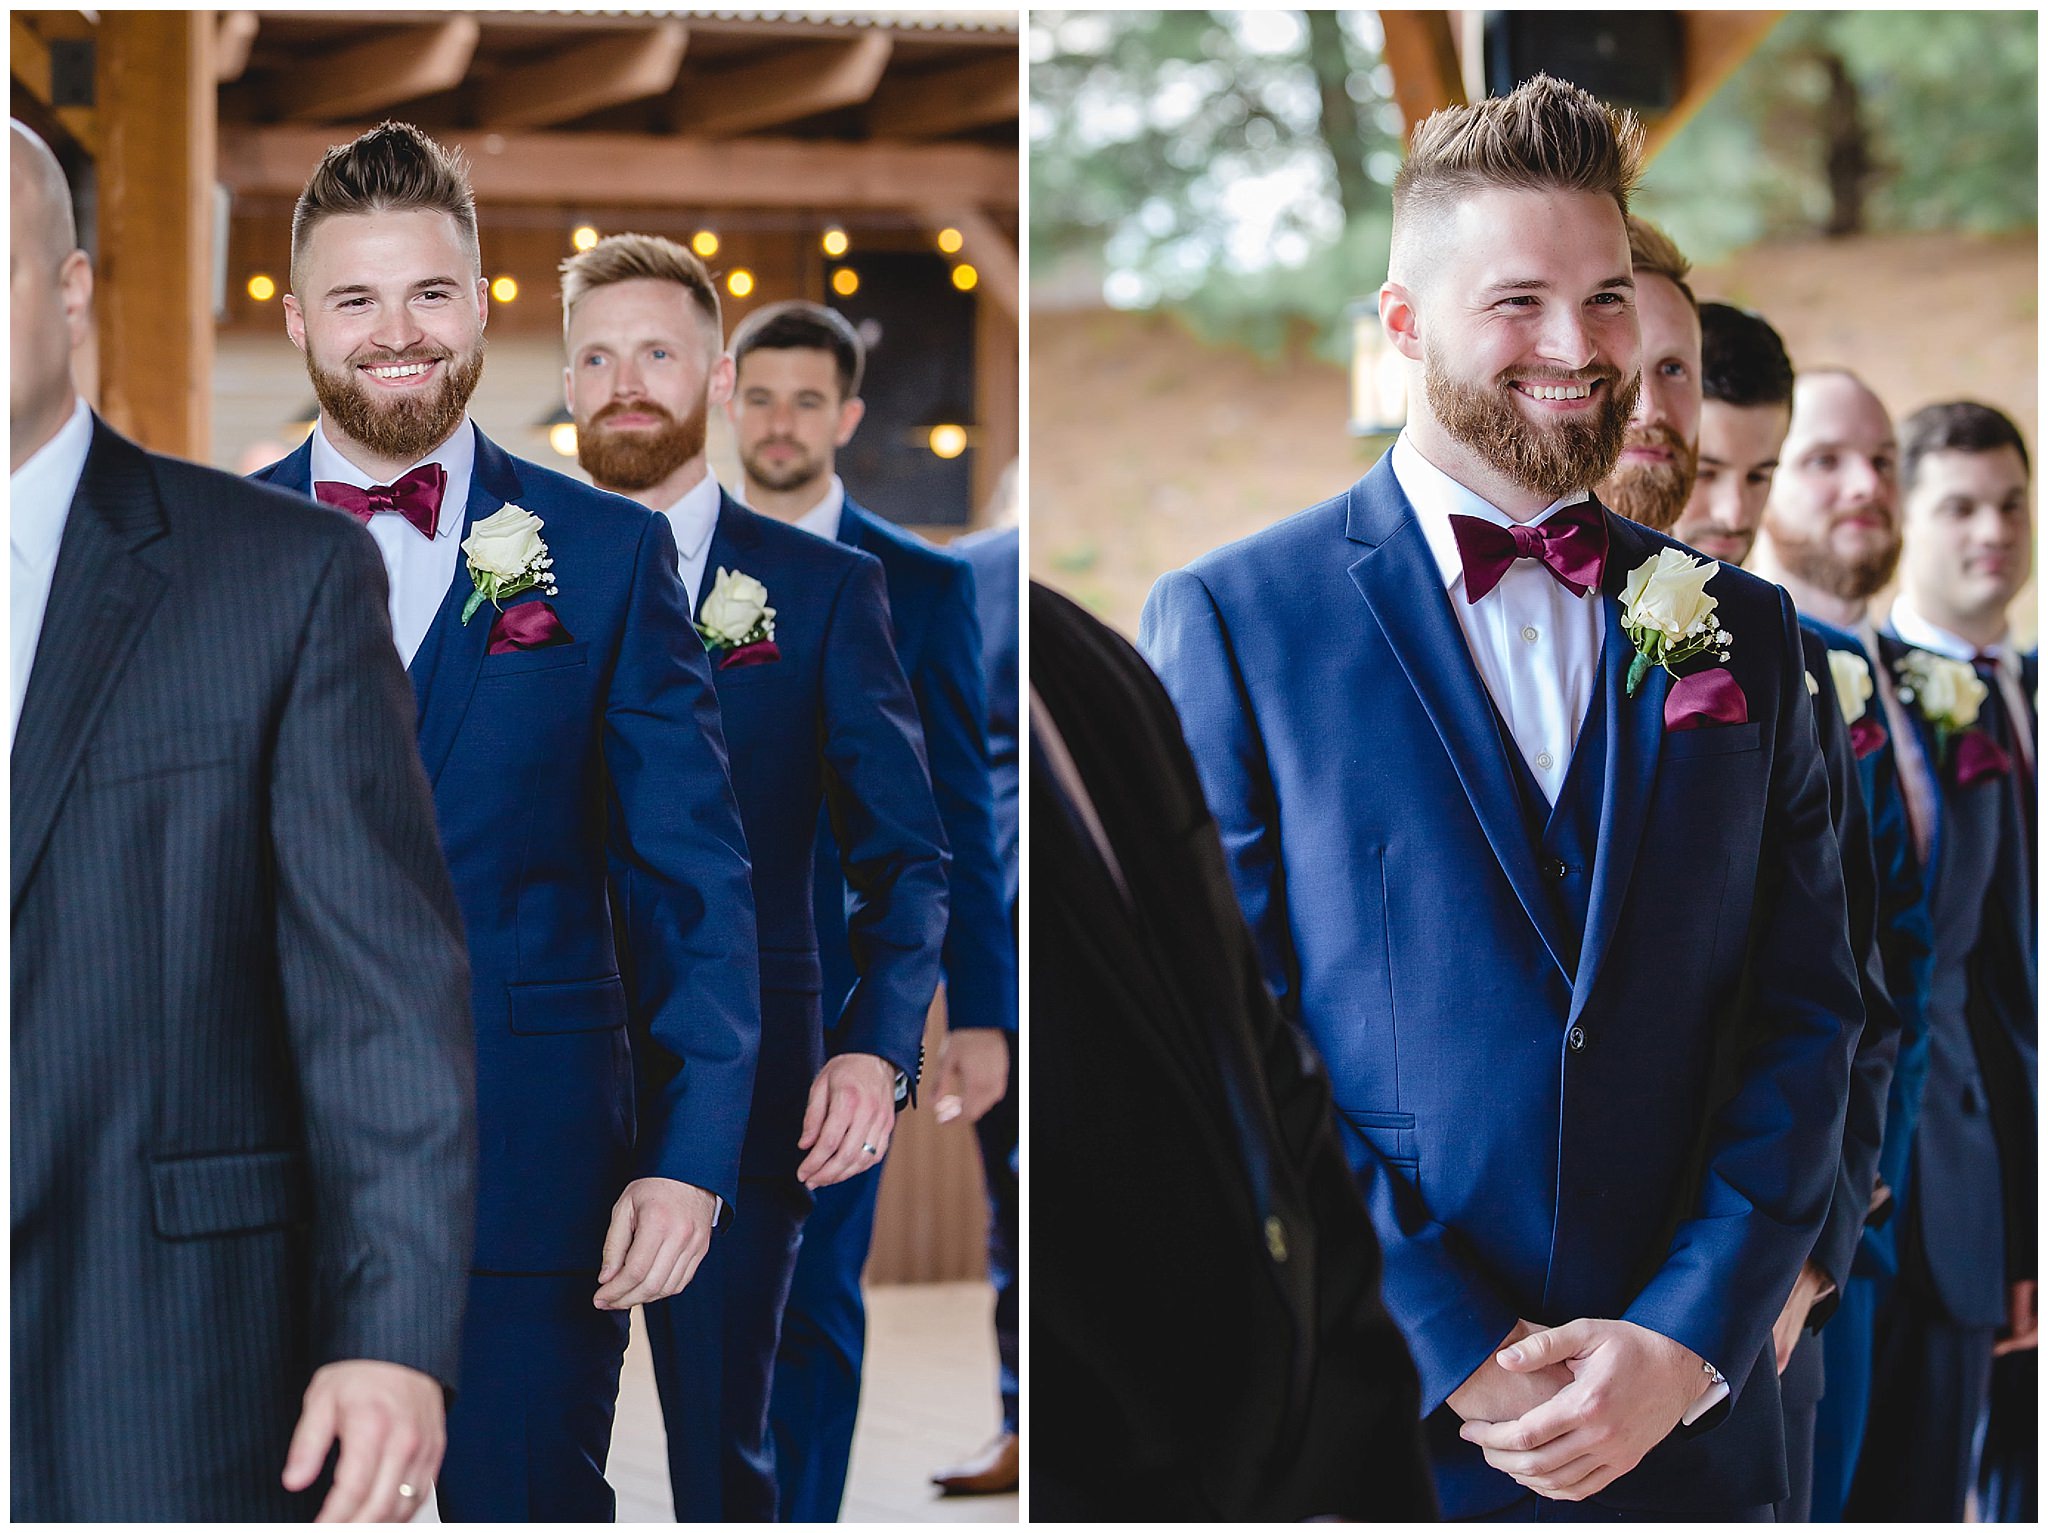 Groom enters his wedding ceremony at the Chadwick